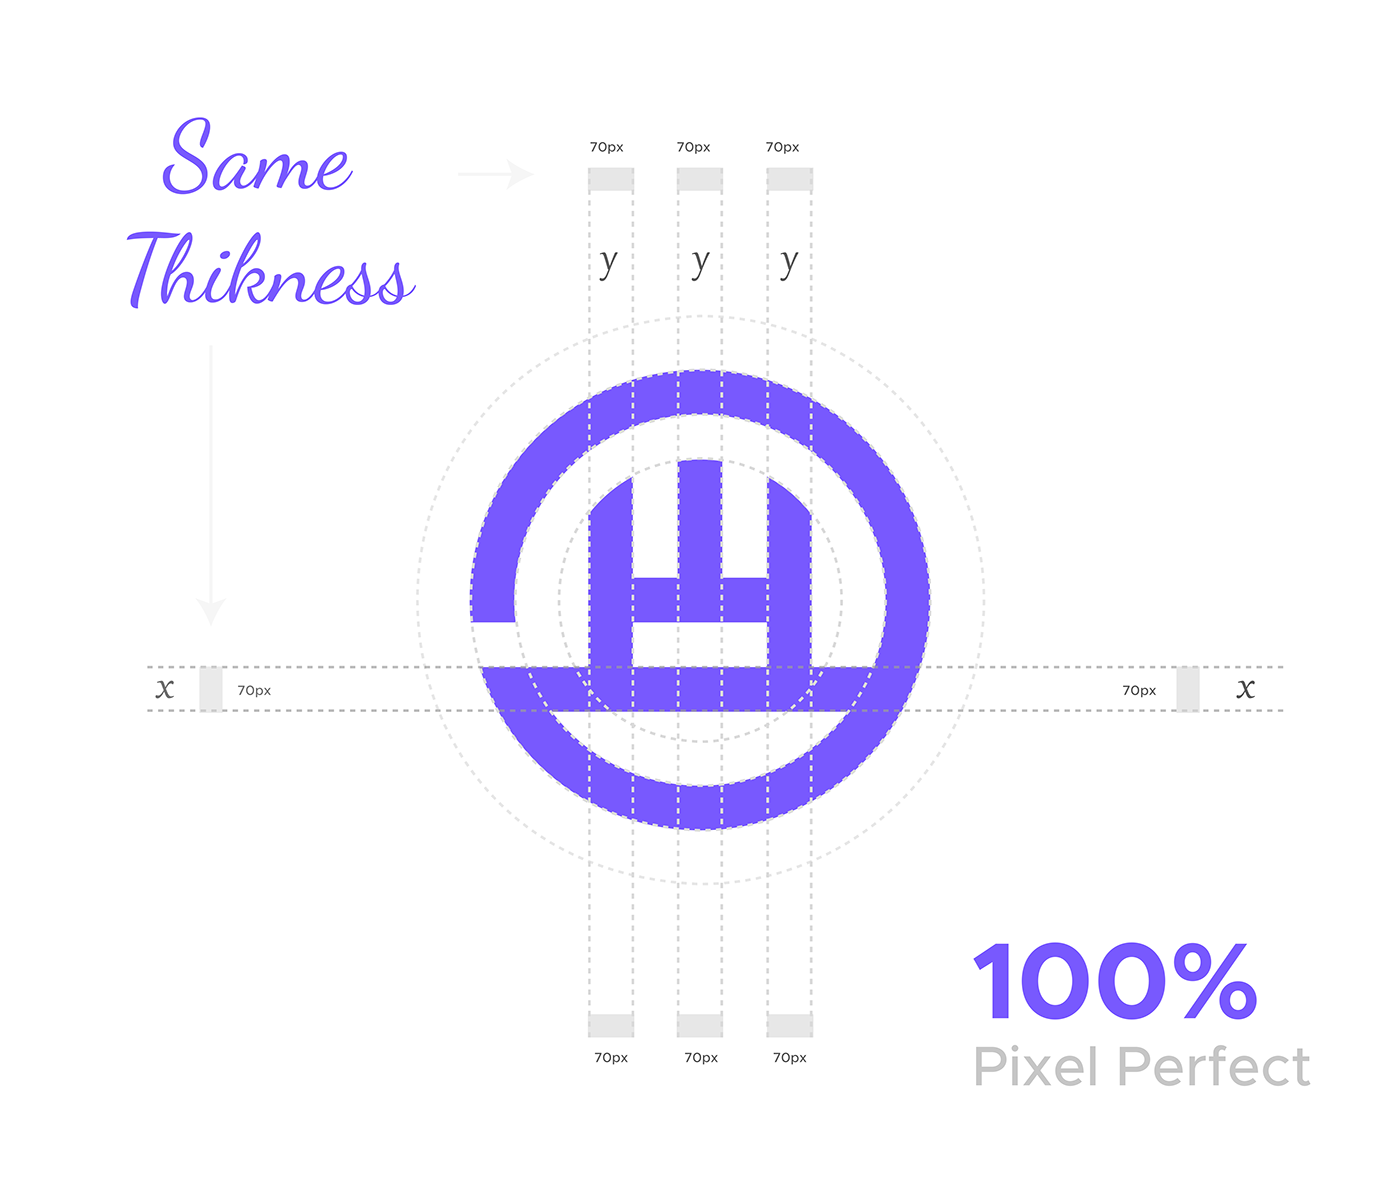 This is the measurement of the logo, The logo measurement is 100% pixel perfect